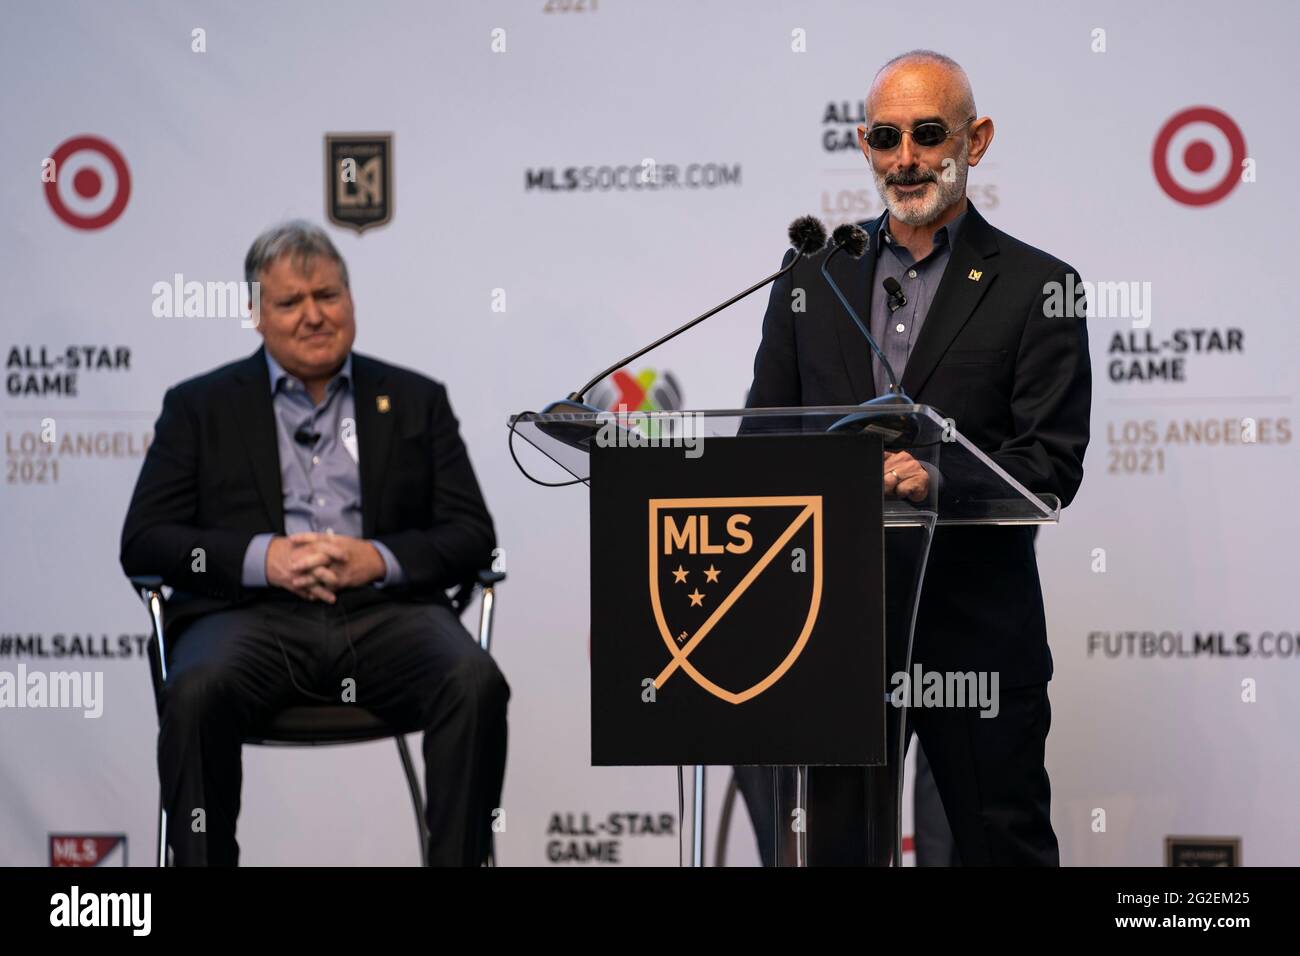 LAFC President and CBO, Larry Freedman speaks during a MLS and LIGA MX press announcement at Banc of California, Wednesday, June 9, 2021, in Los Angel Stock Photo